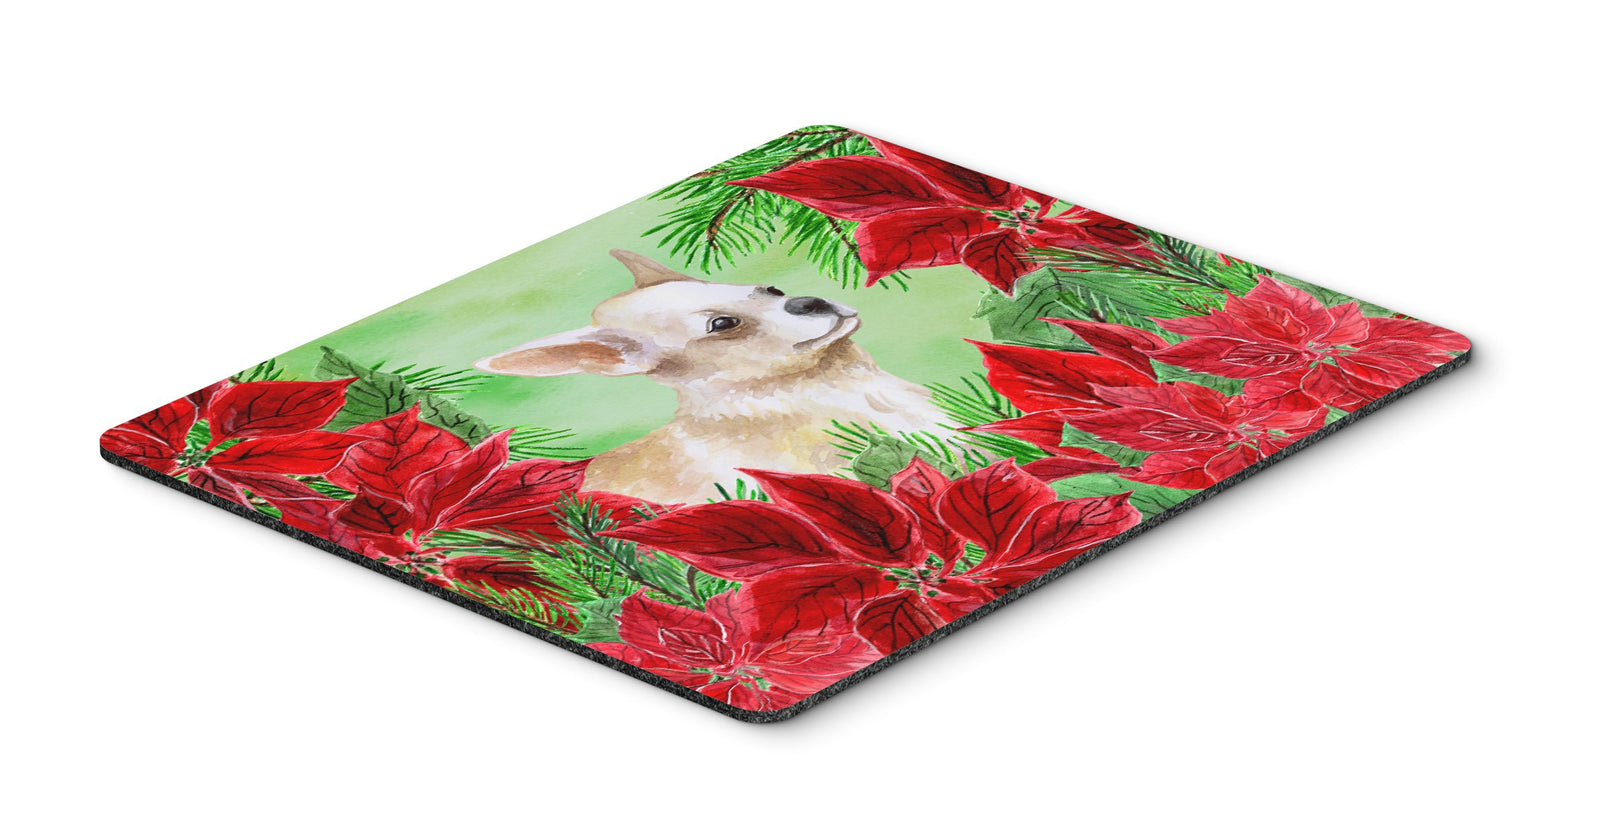 Chihuahua Leg up Poinsettas Mouse Pad, Hot Pad or Trivet CK1345MP by Caroline's Treasures